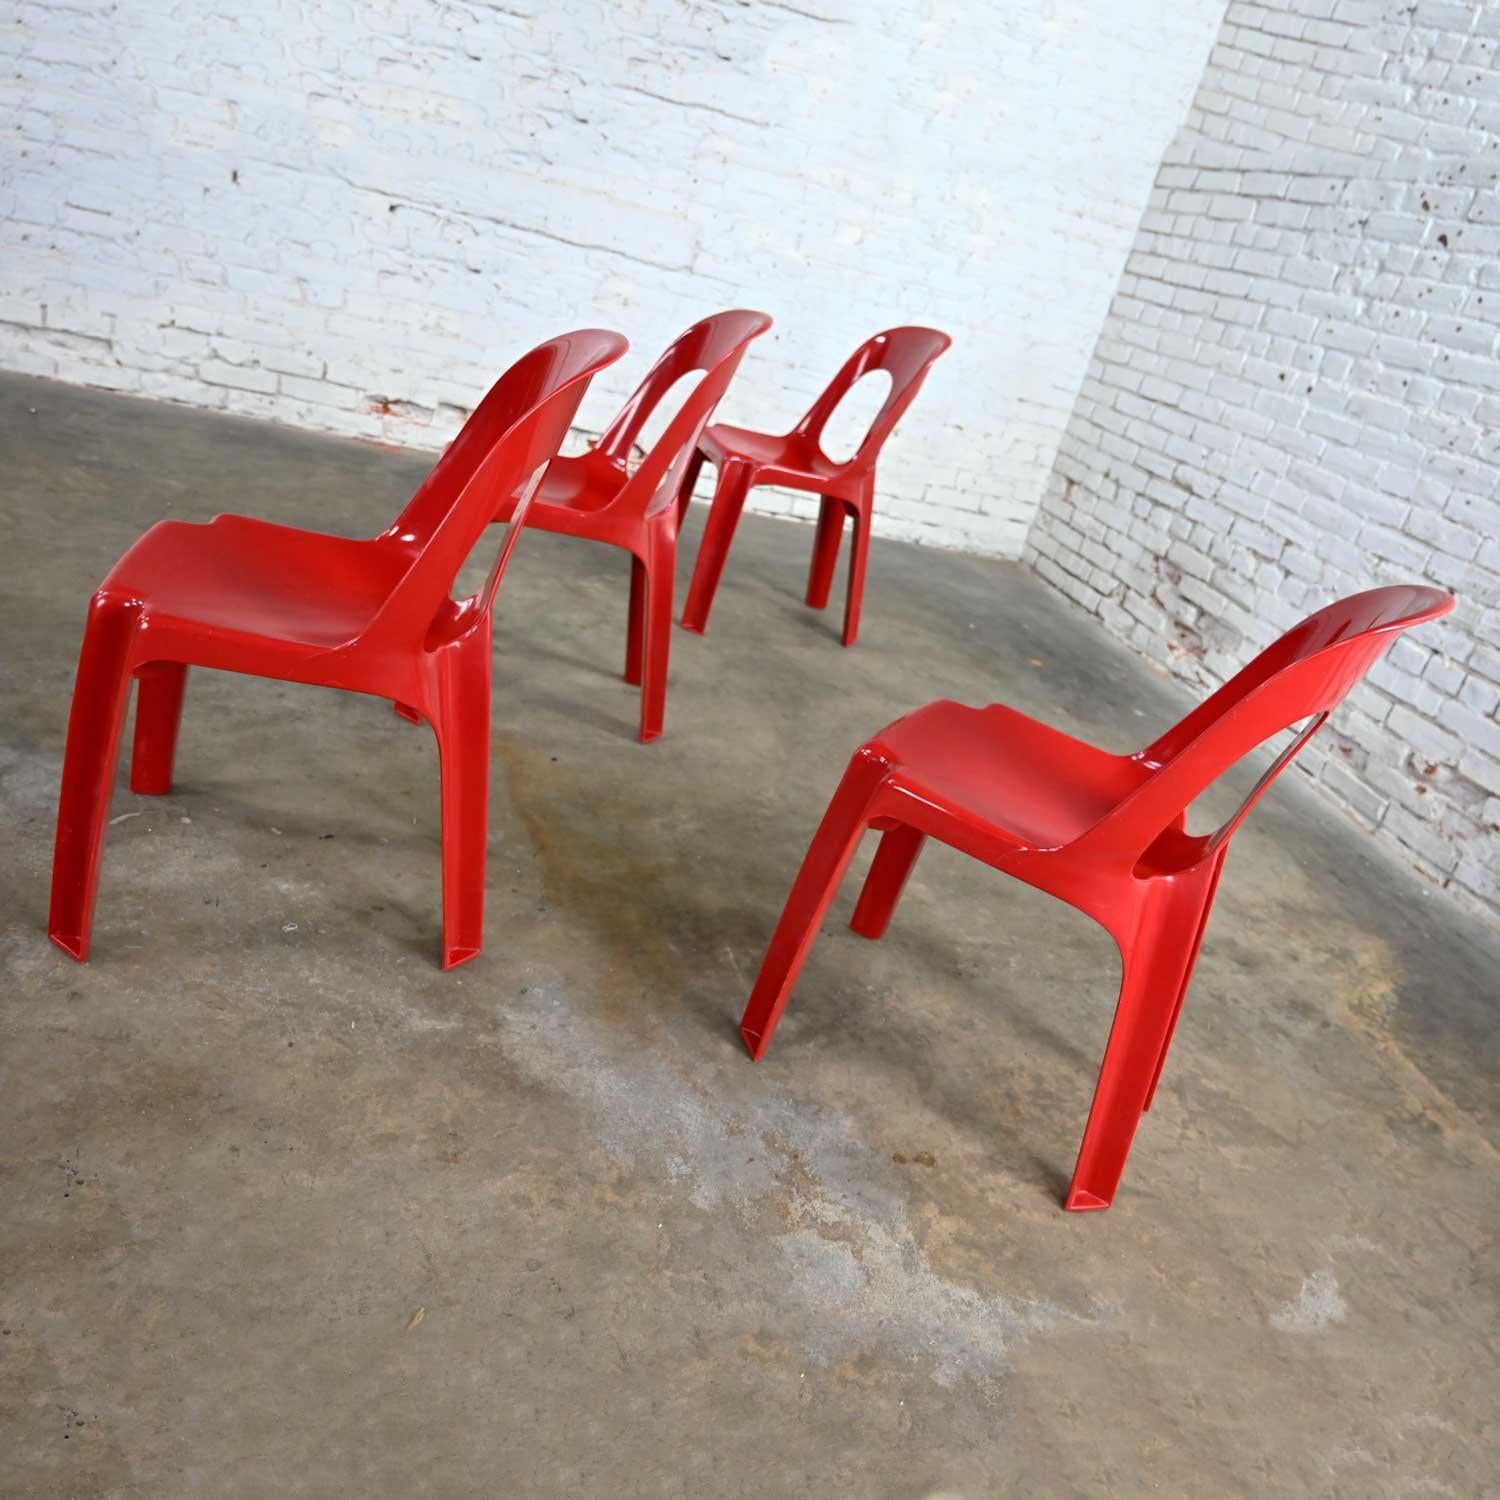 henry massonnet chairs